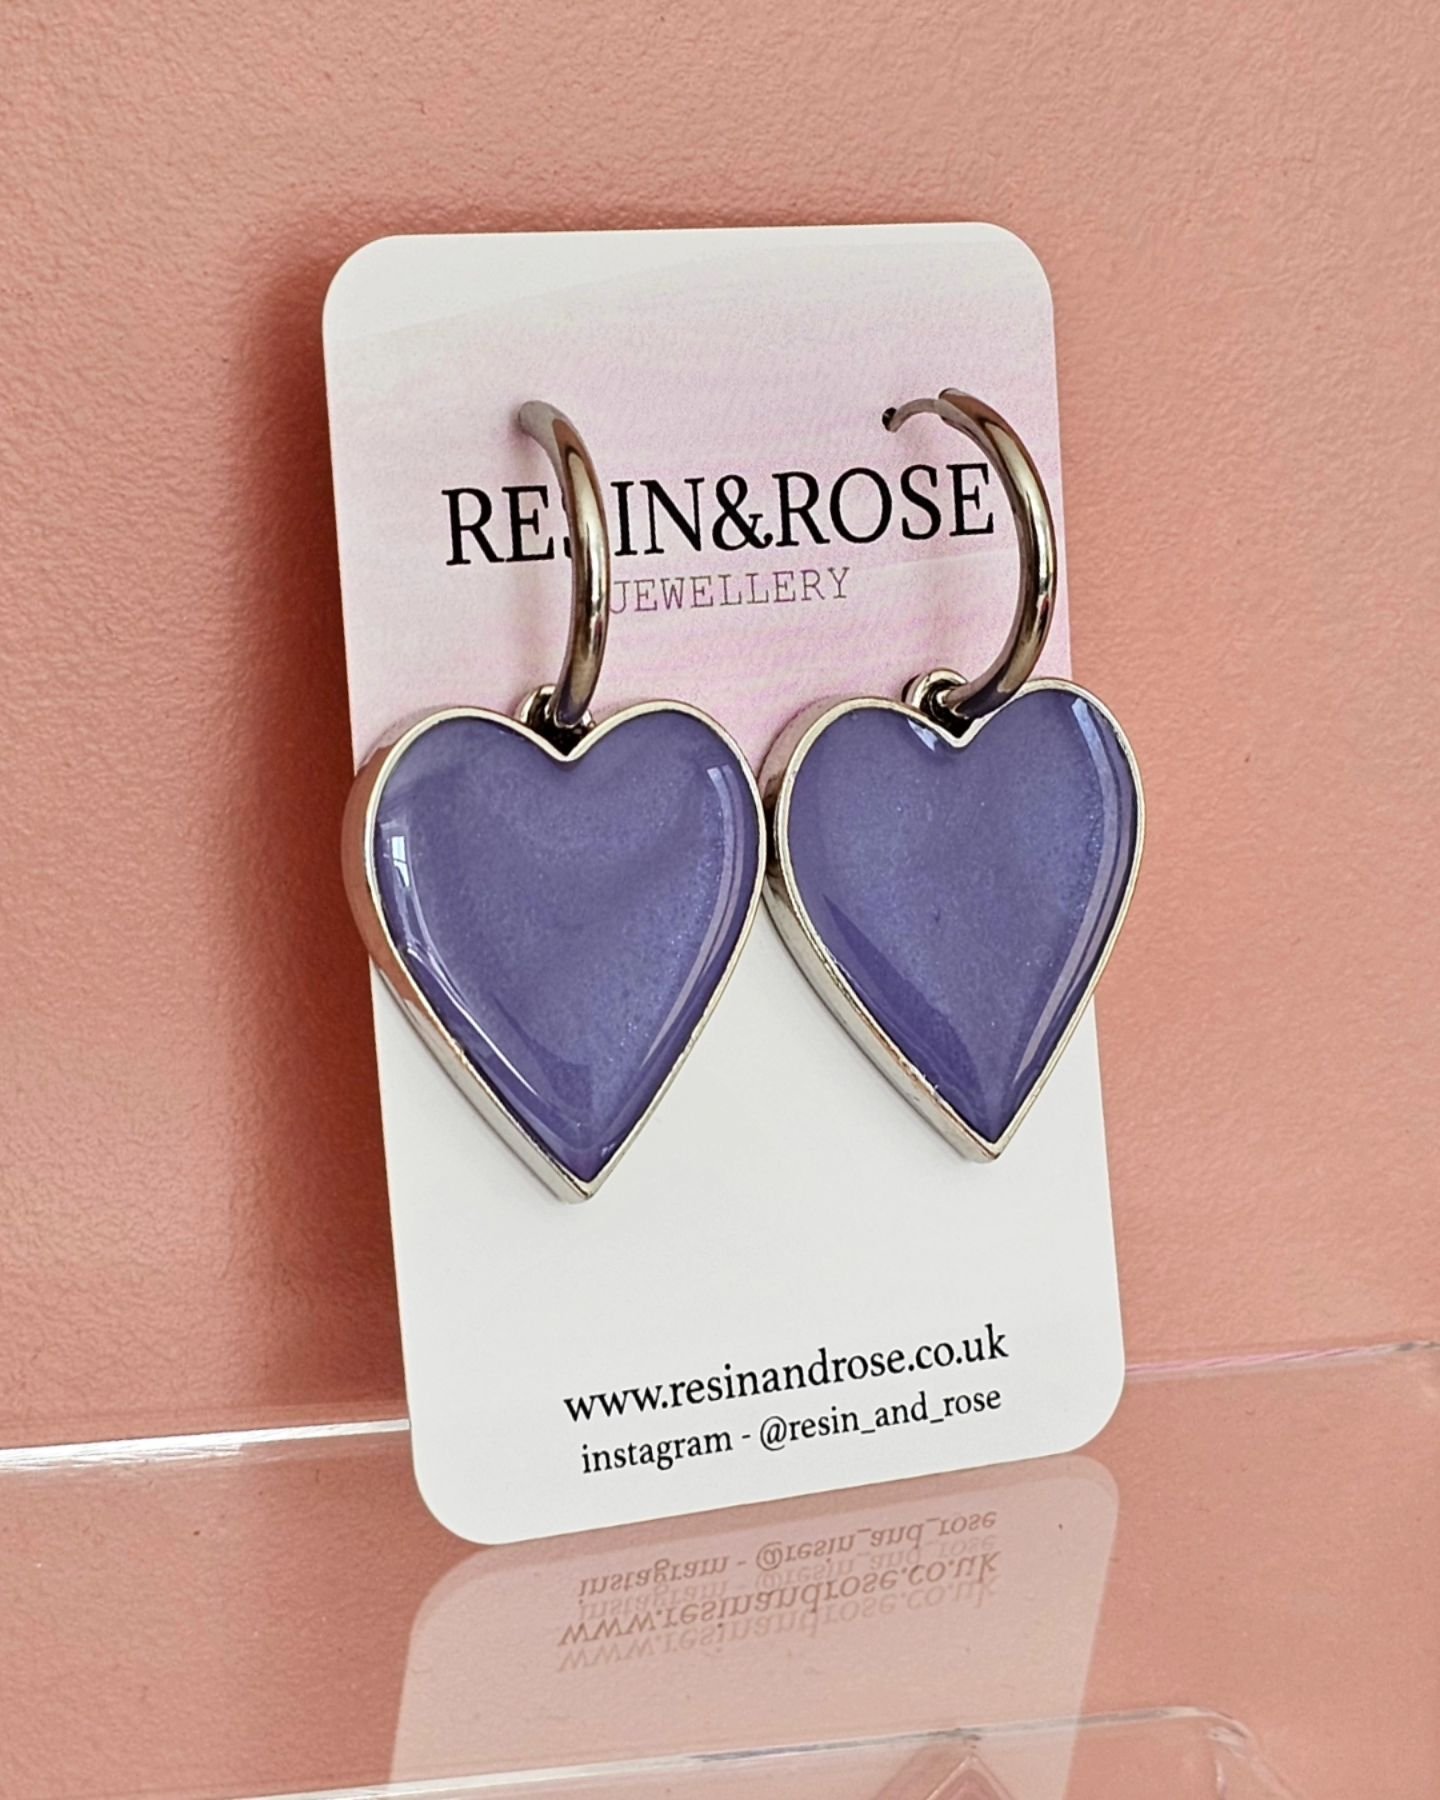 ....and another gorgeous statement earring going out today!!!💜💜💜